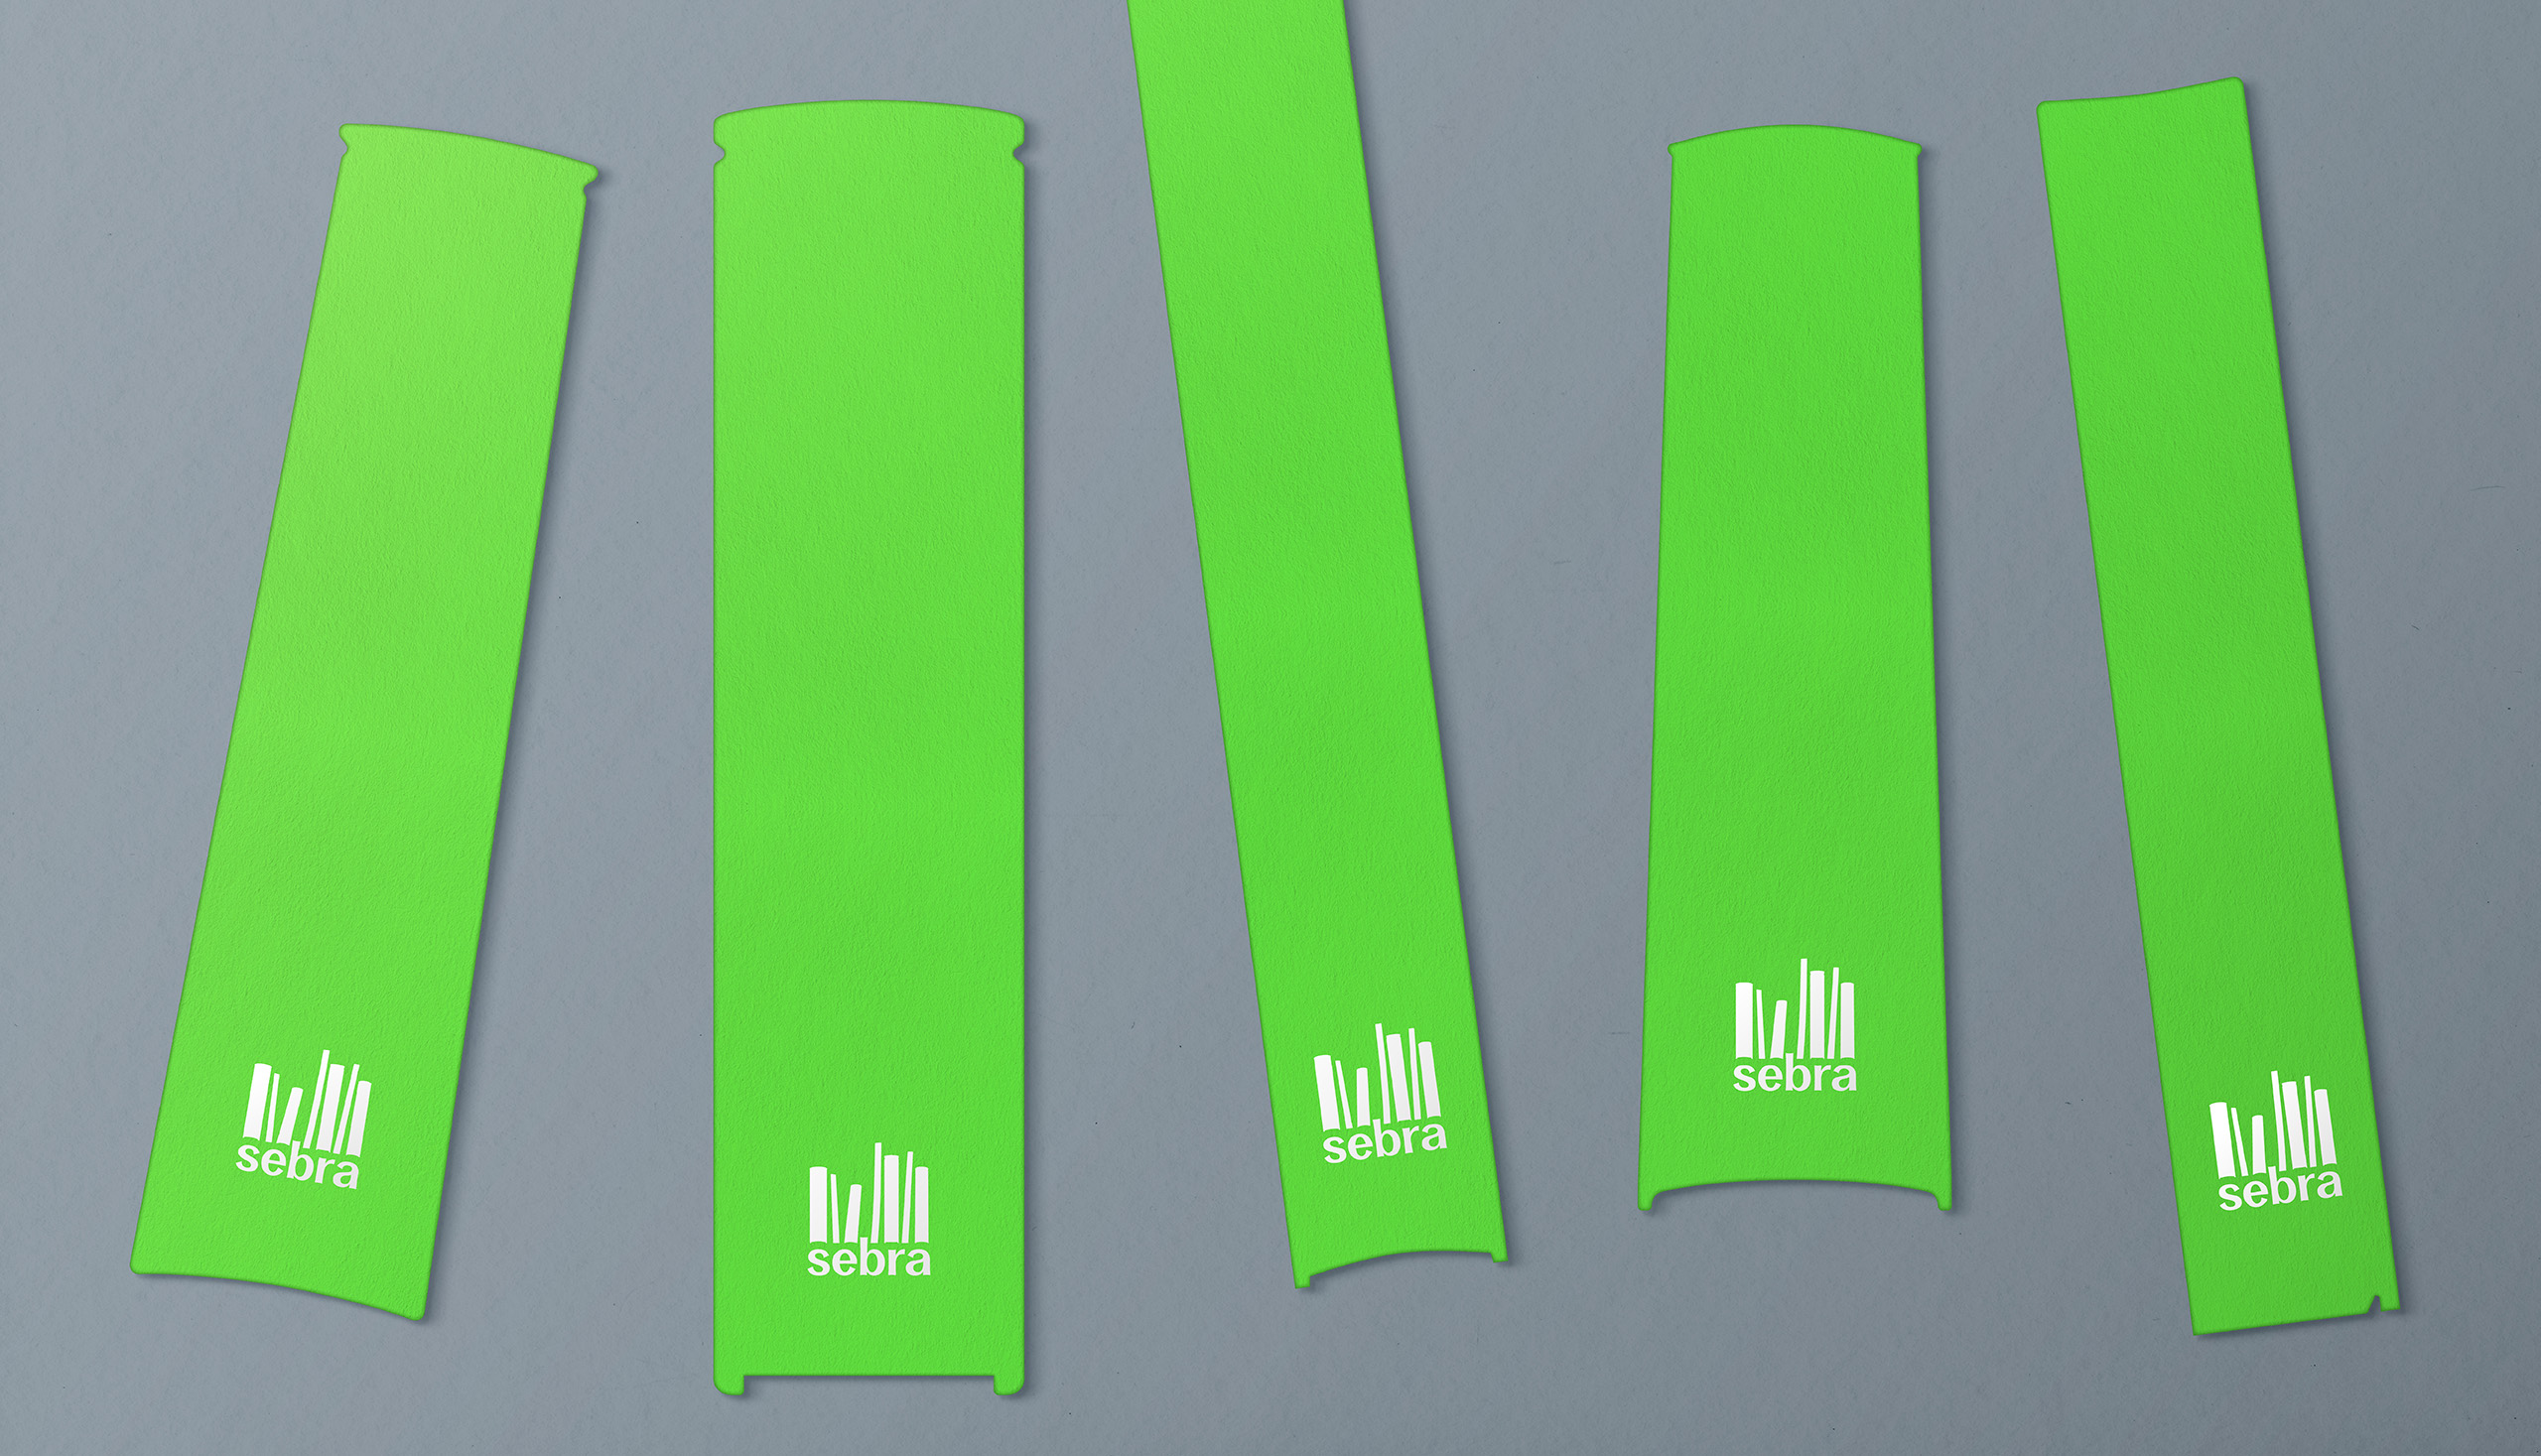 Branded green bookmarks that echo the logotype sat on a grey background